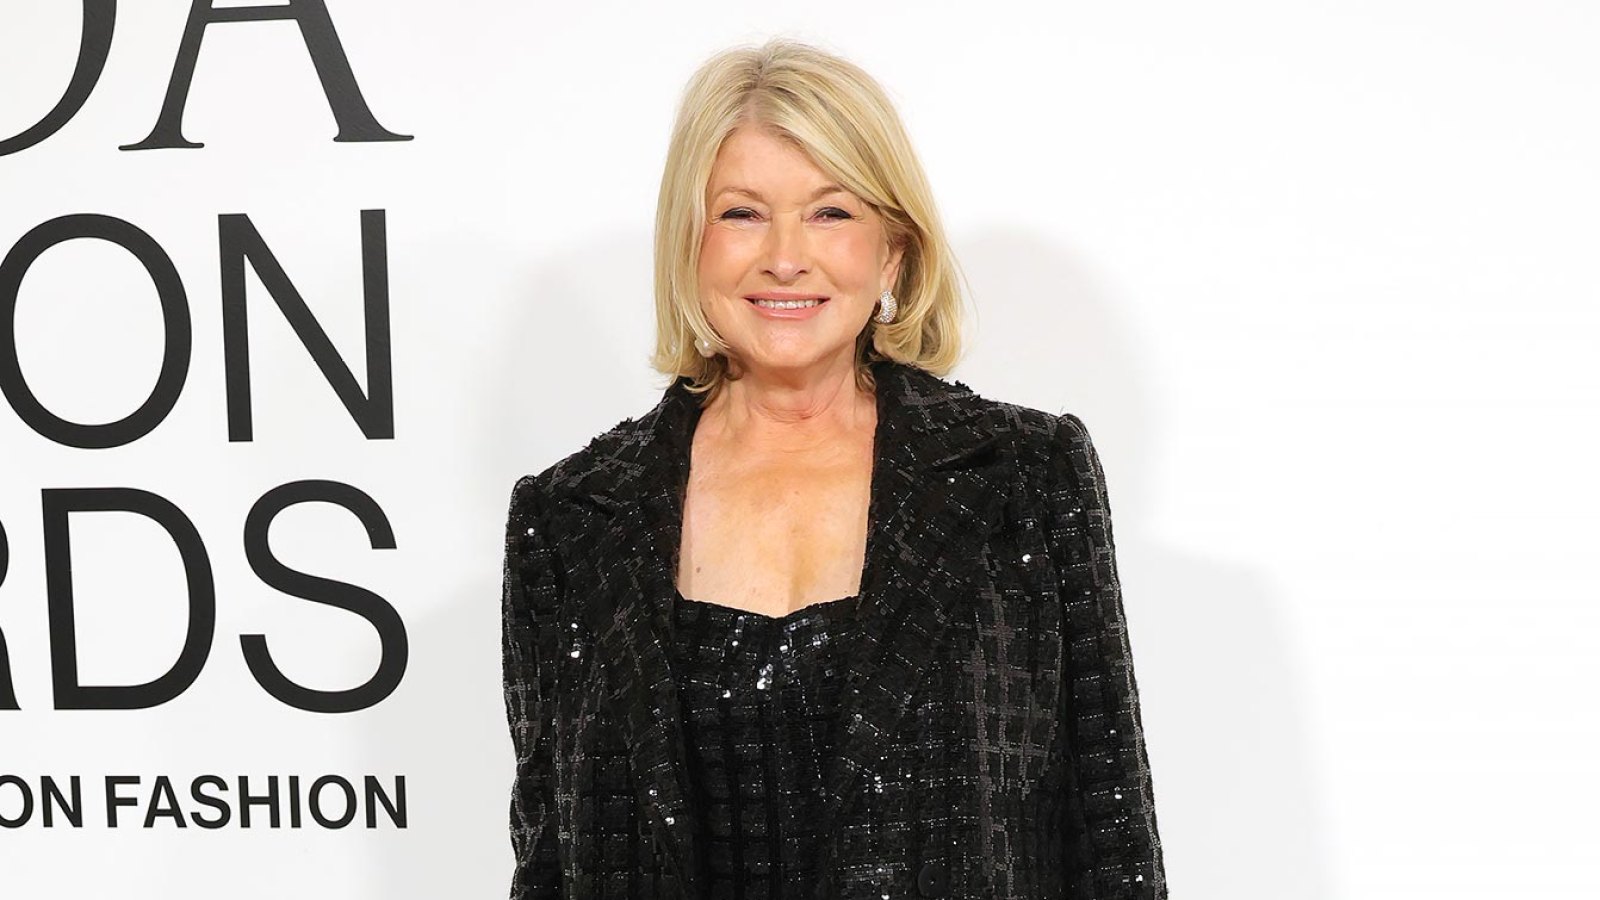 Martha Stewart Does the Unthinkable and Cancels Her Thanksgiving Dinner